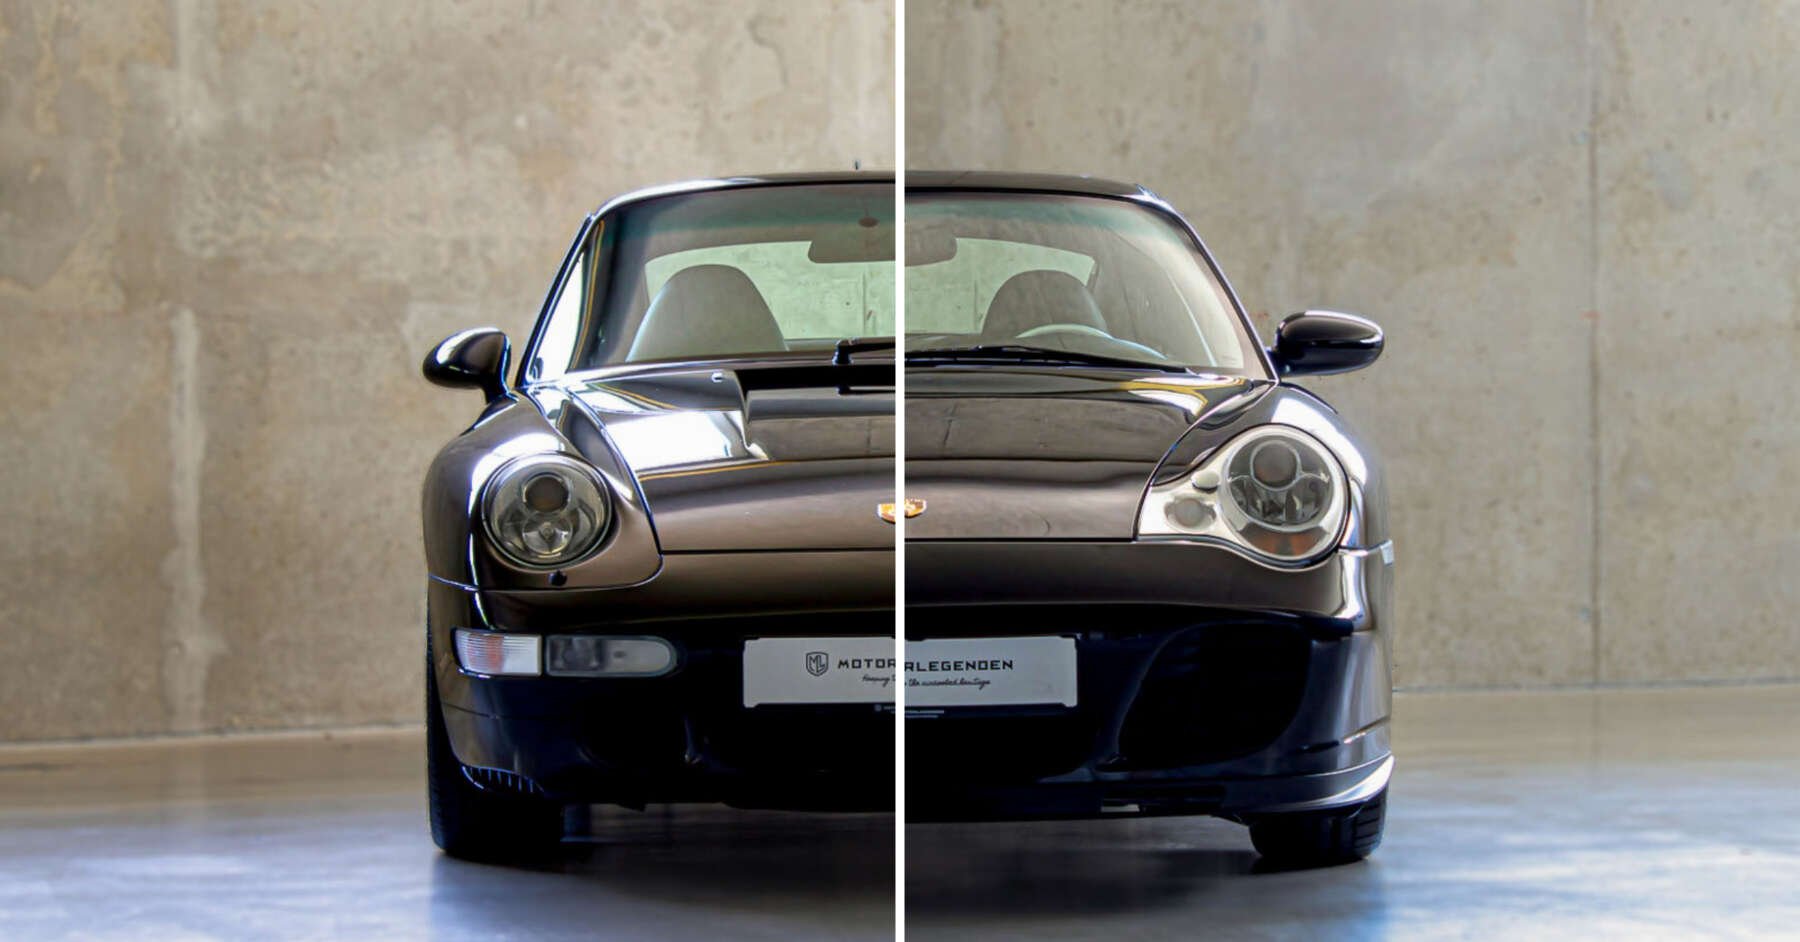 Porsche 911 Turbo – air- or water-cooled?